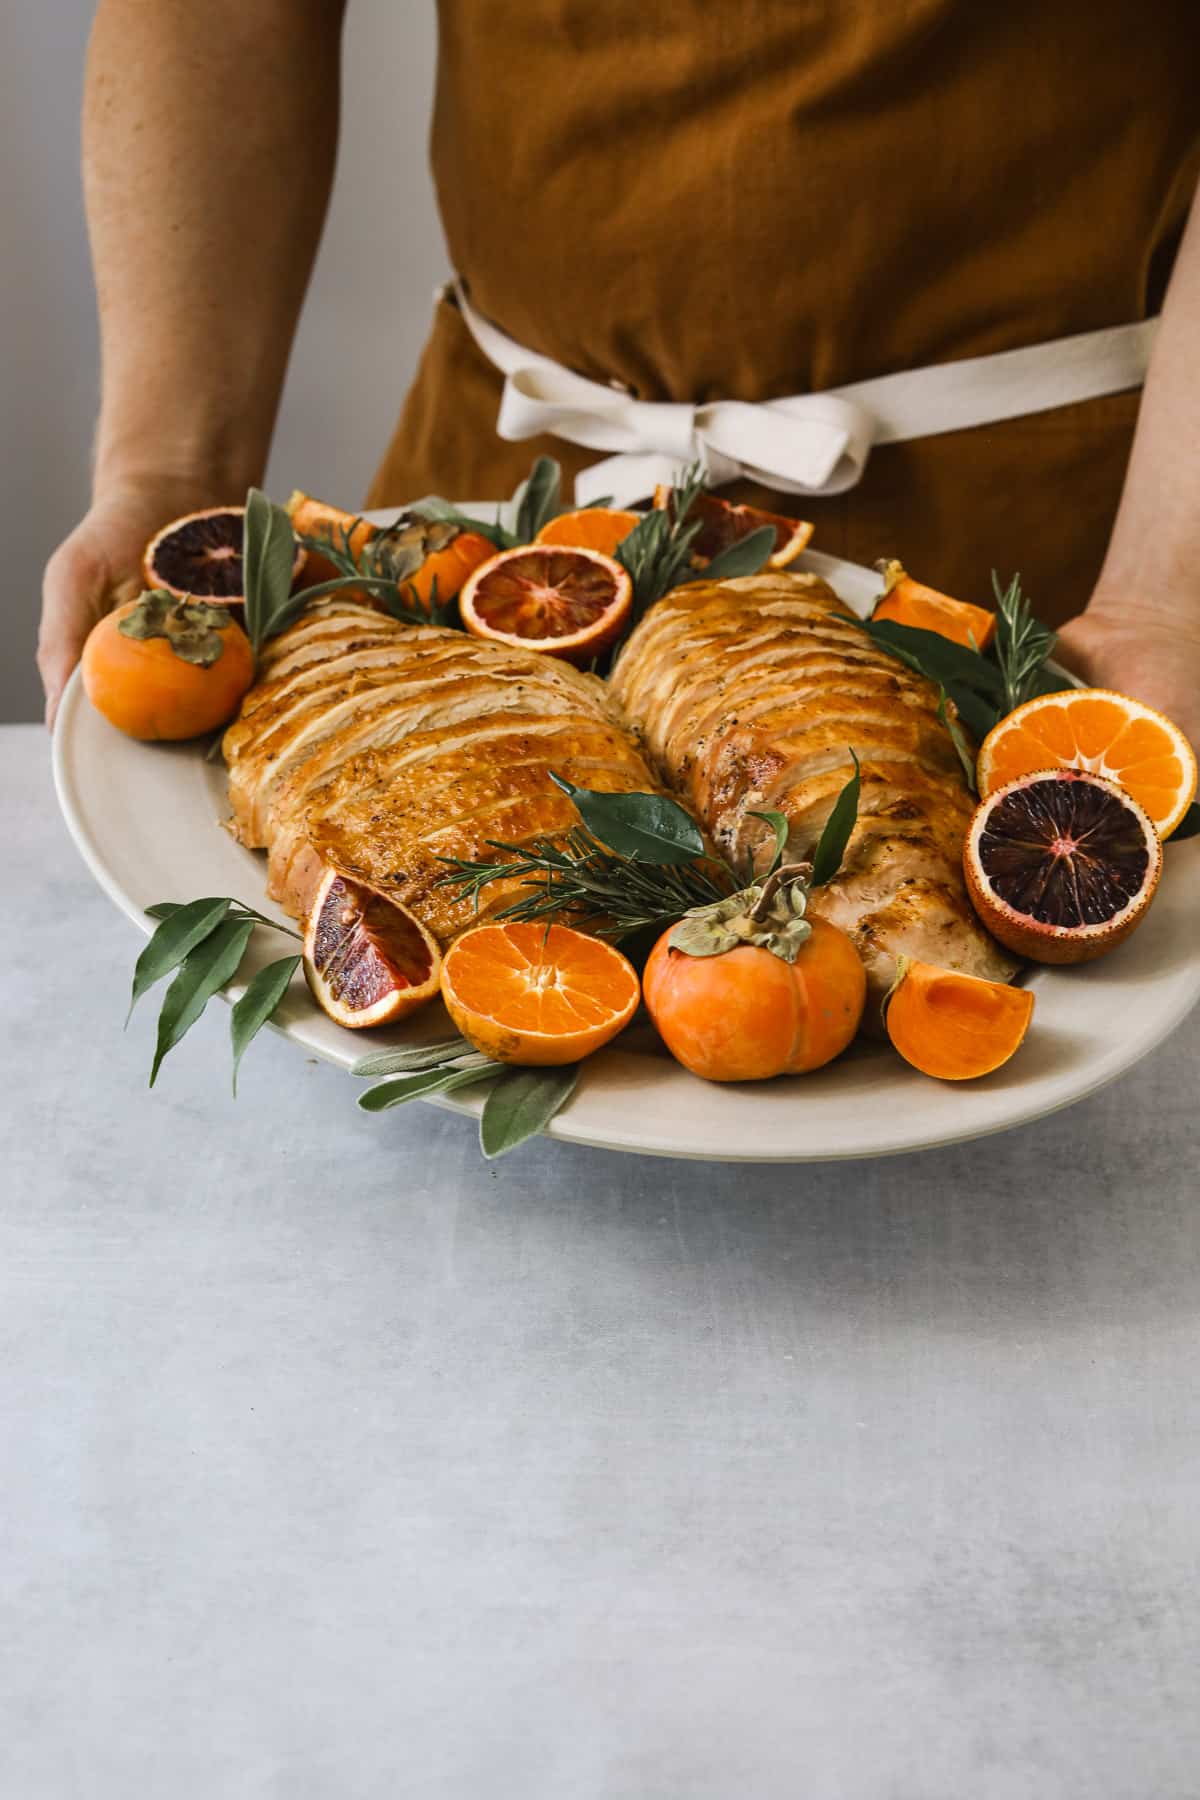 a person in a brown chefs apron presenting a platter of Roasted Turkey Breast garnished with fresh herbs, citrus and persimmons